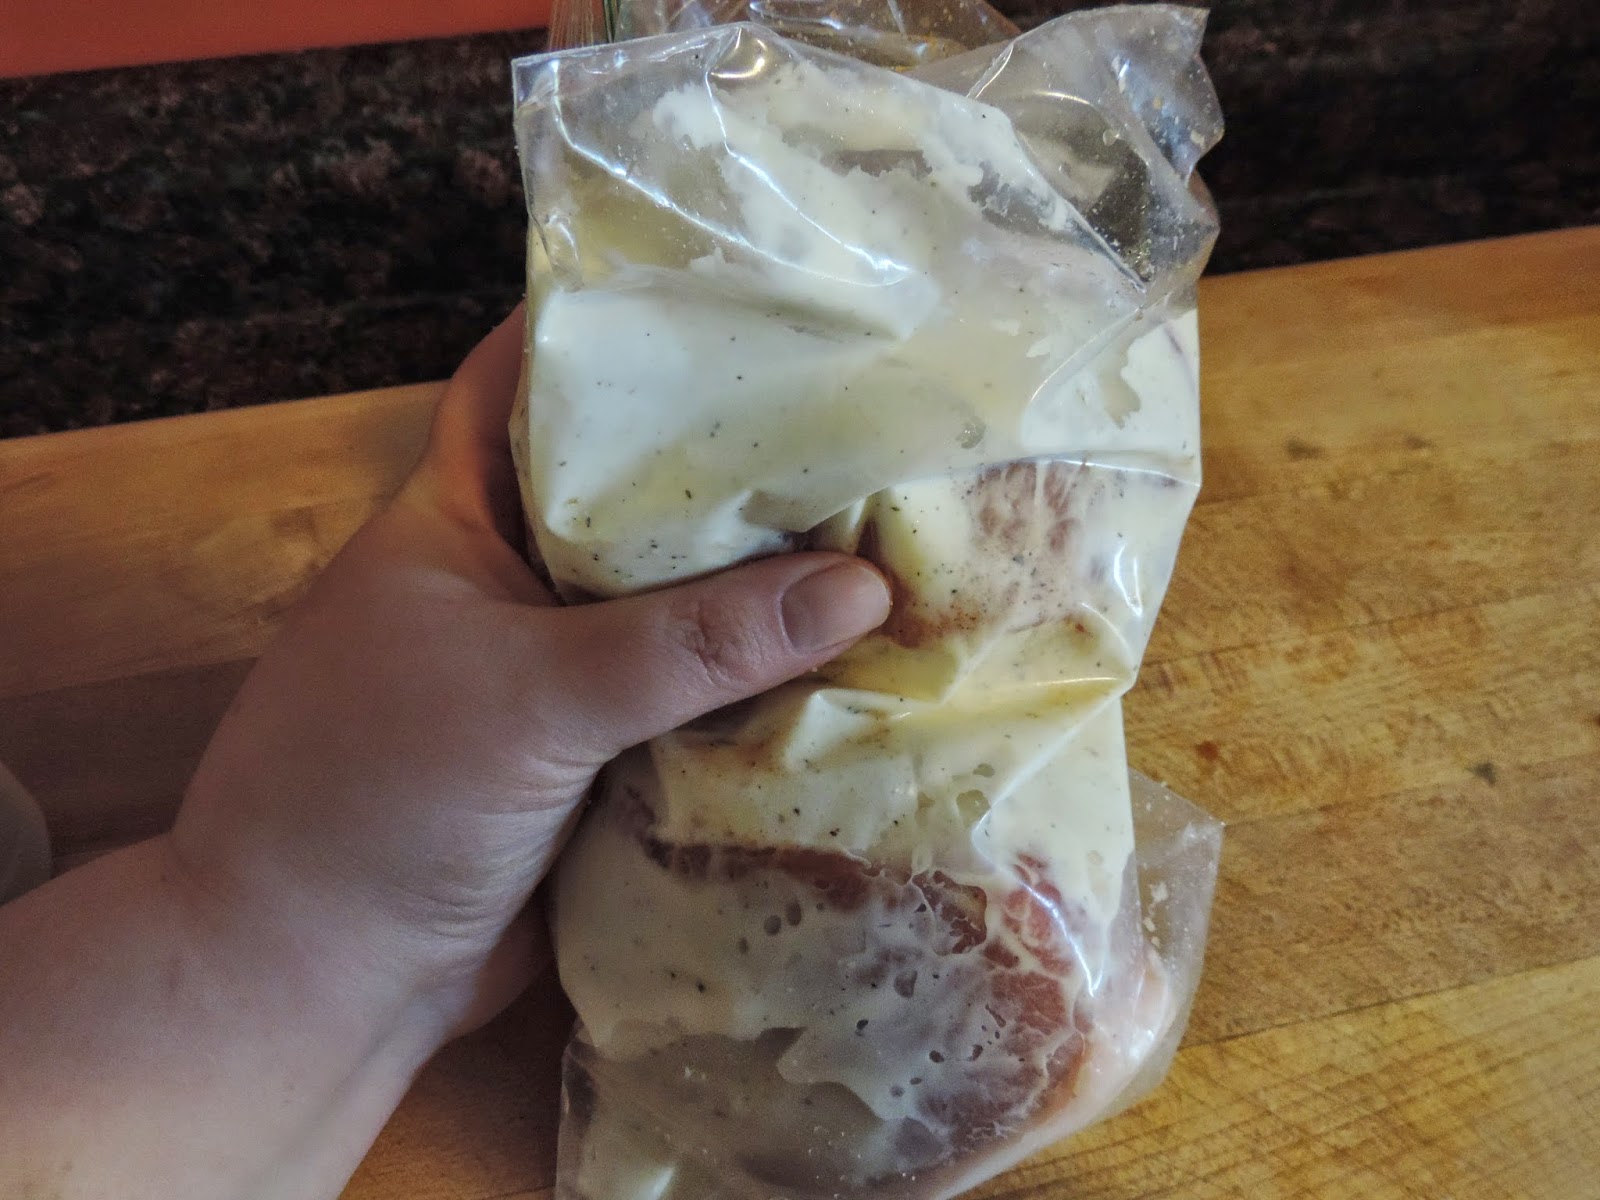 The ranch being rubbed into the pork chops, inside the bag.  